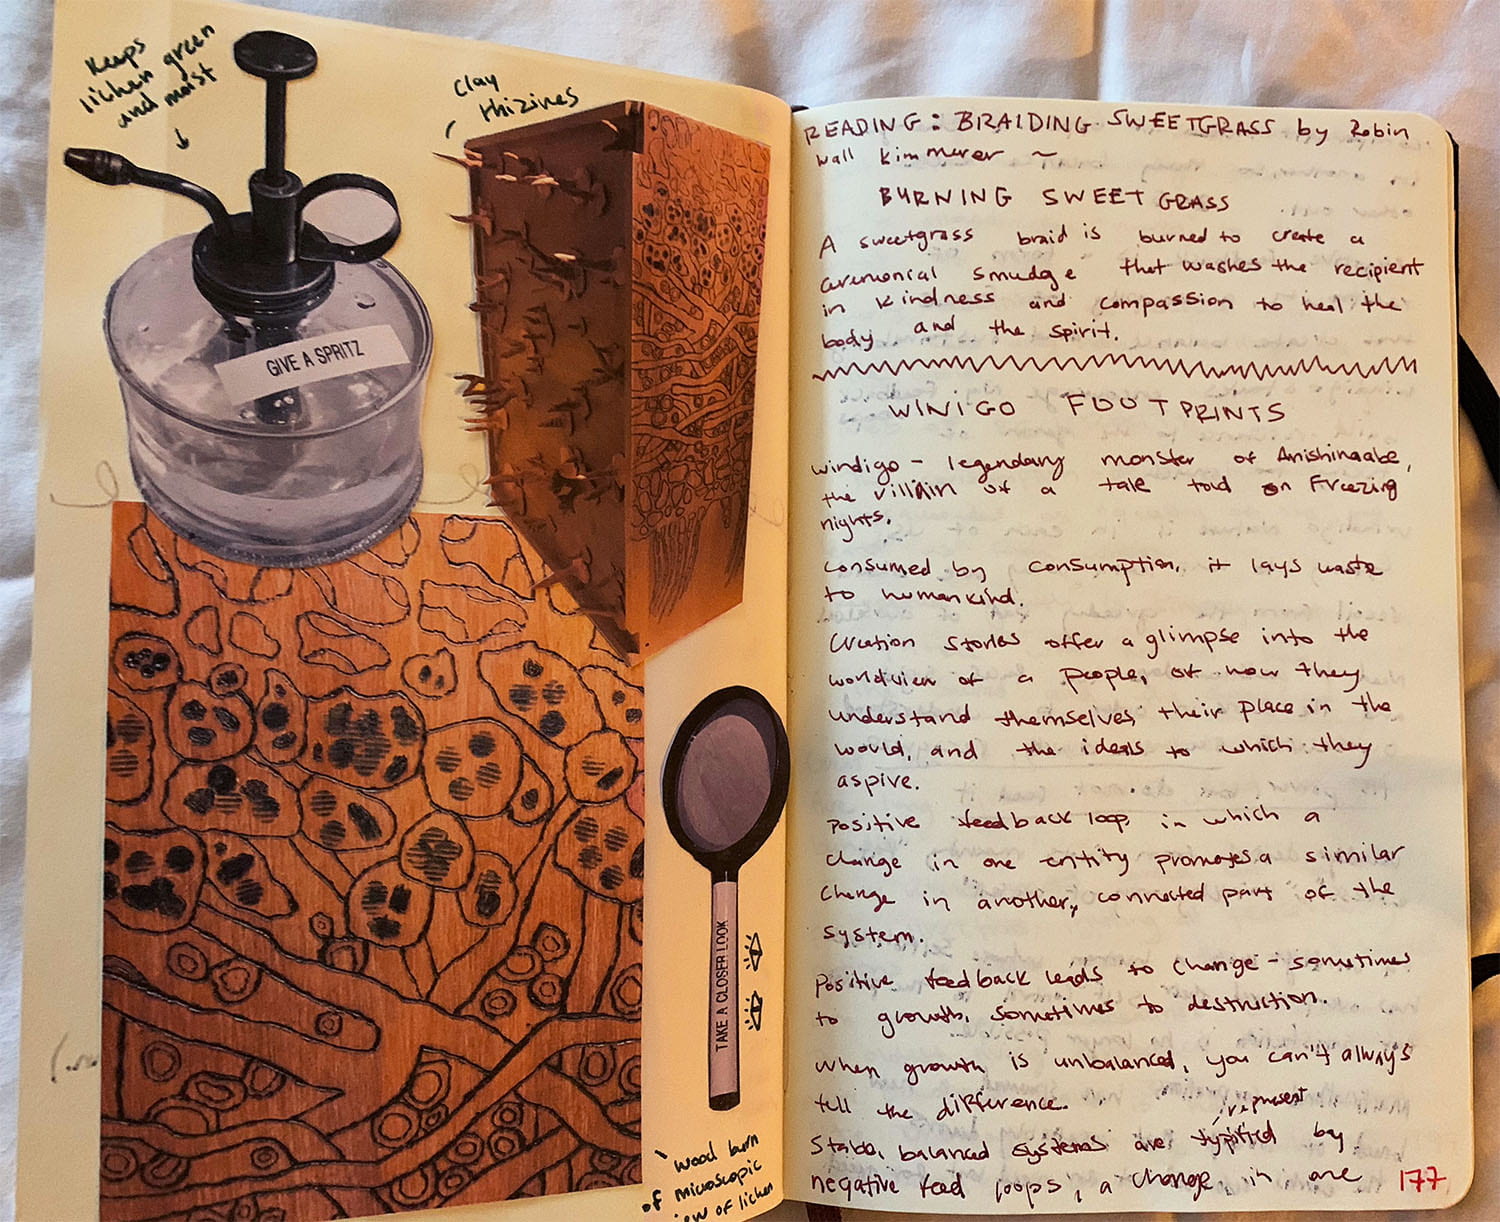 journal entry with cutout photos of a spray bottle, decorative spikey box, patterns in wood, and a spoon, next to handwritten notes titled "Reading: Braiding Sweetgrass by Robin Wall Kimmer"